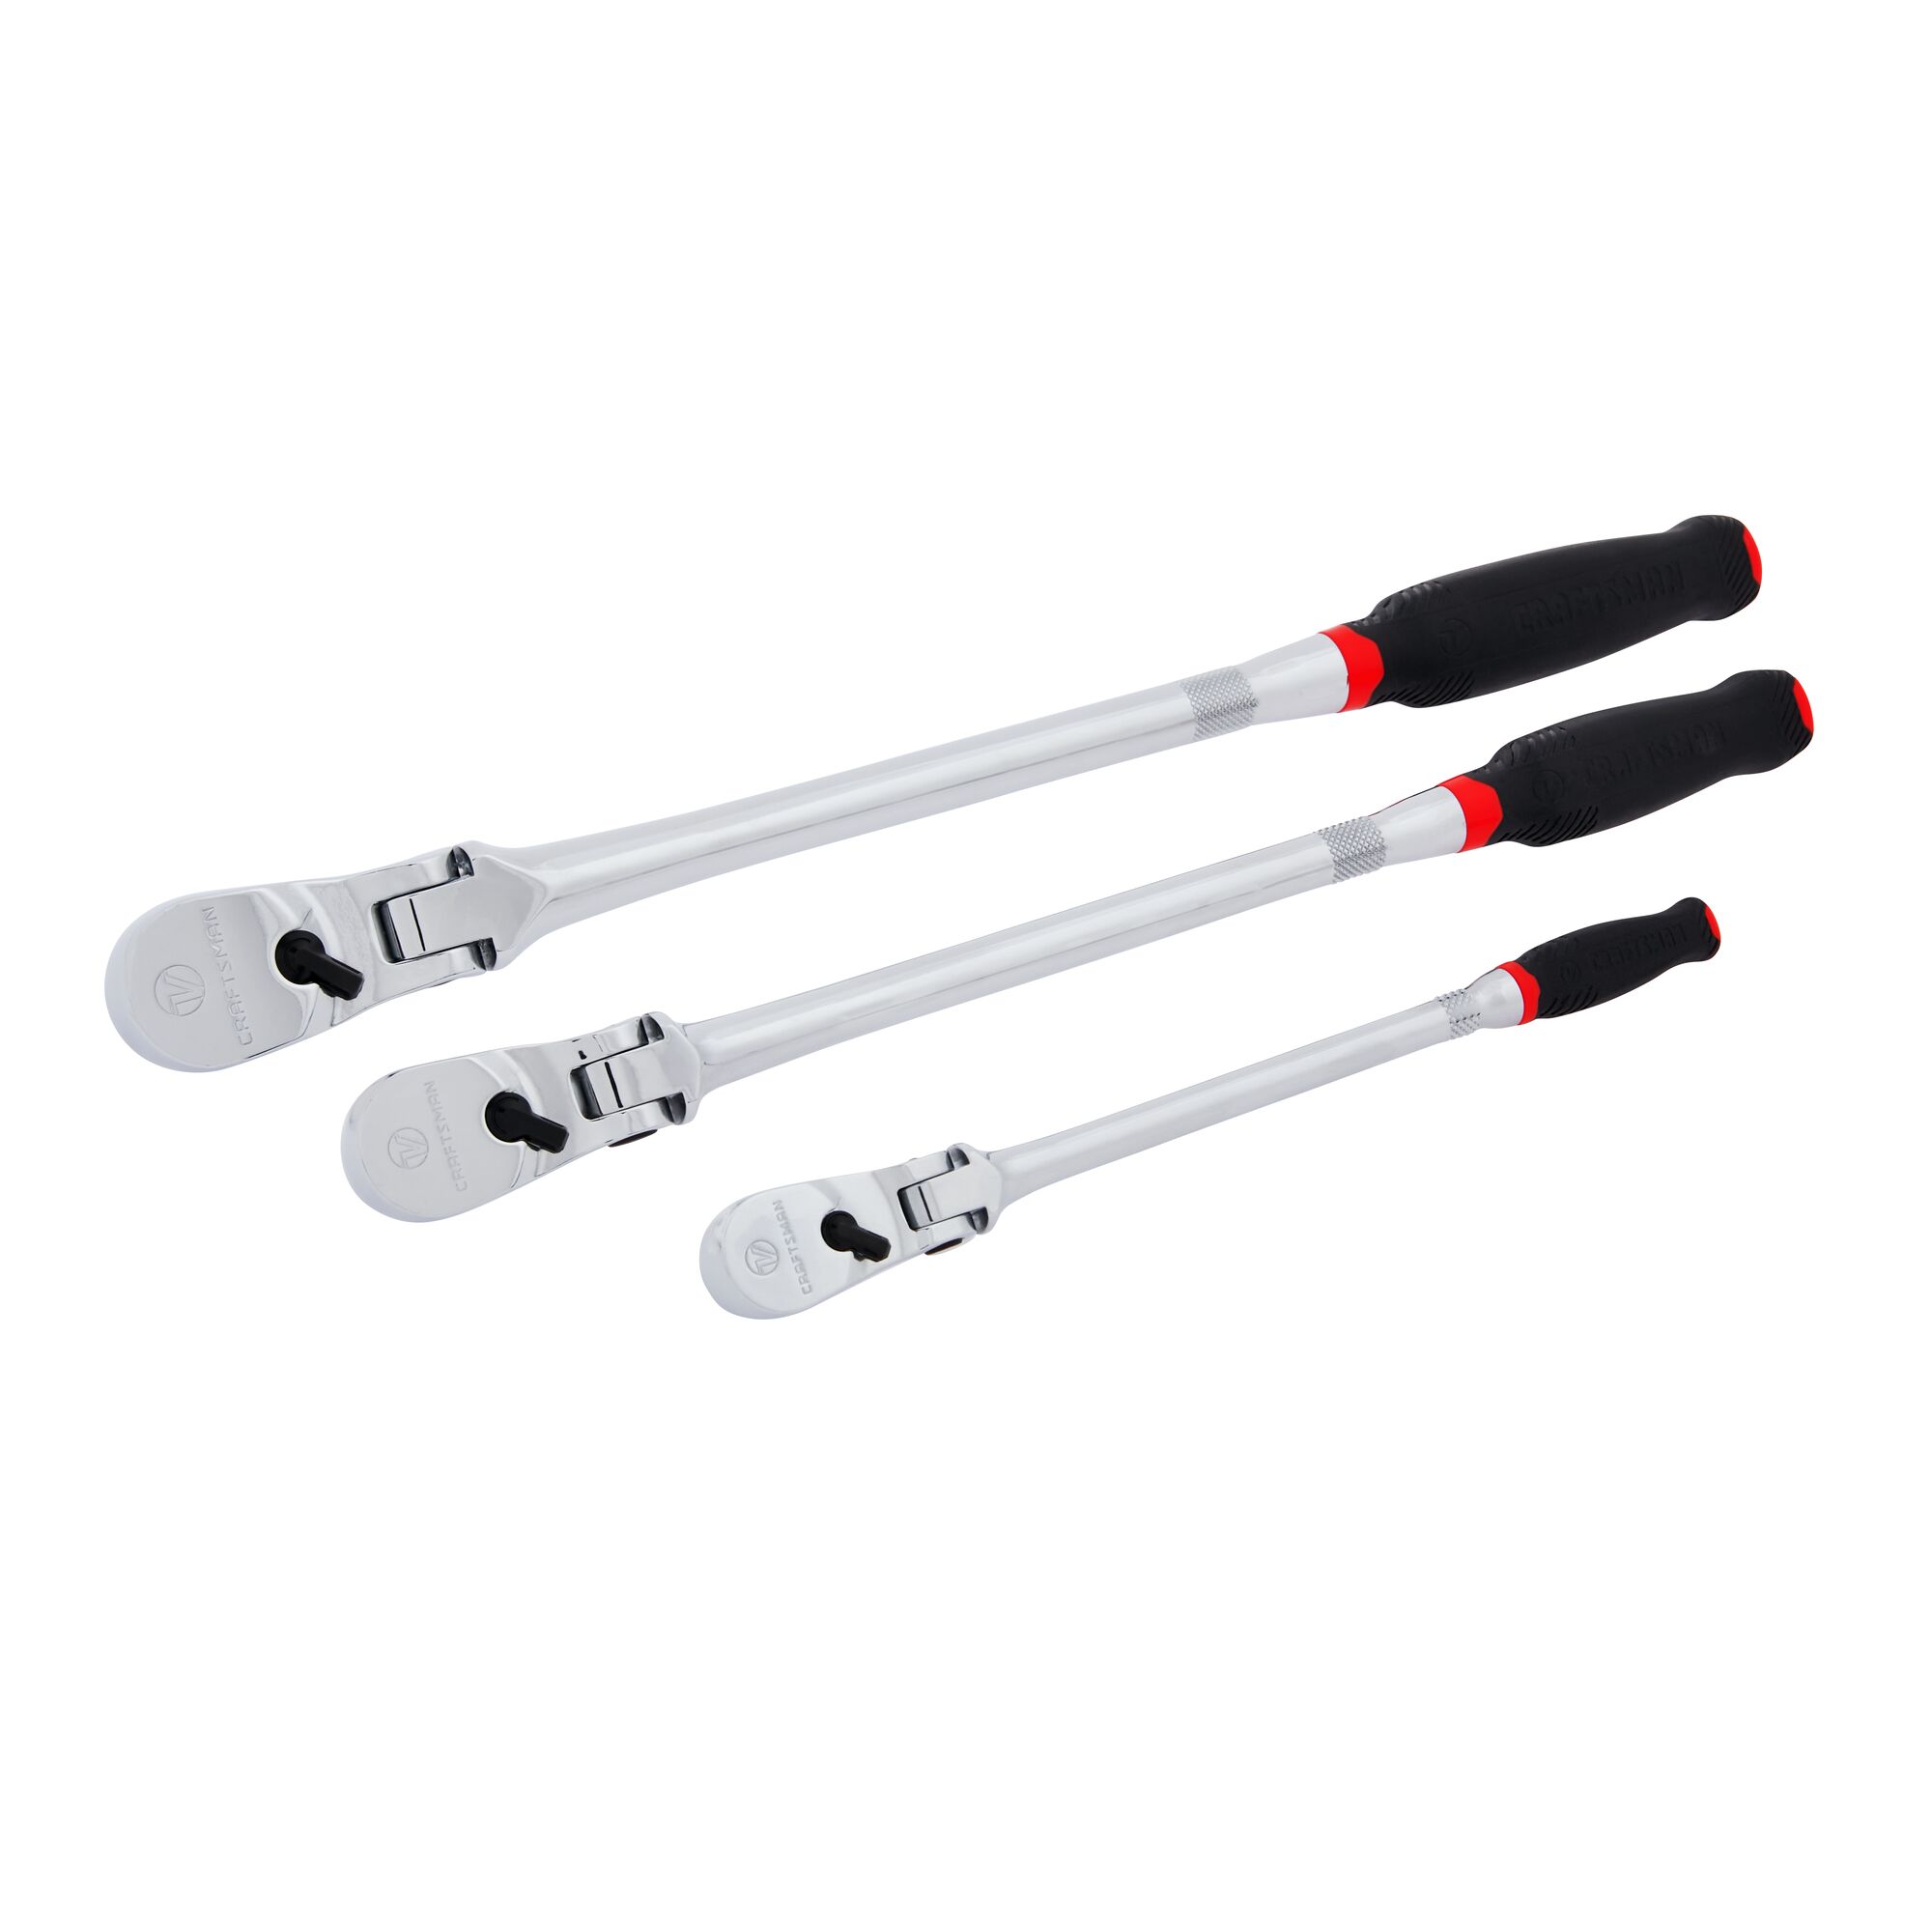 Right profile of V series quarter inch three eighth inch and half inch drive comfort grip long flex head ratchet. 3 pack